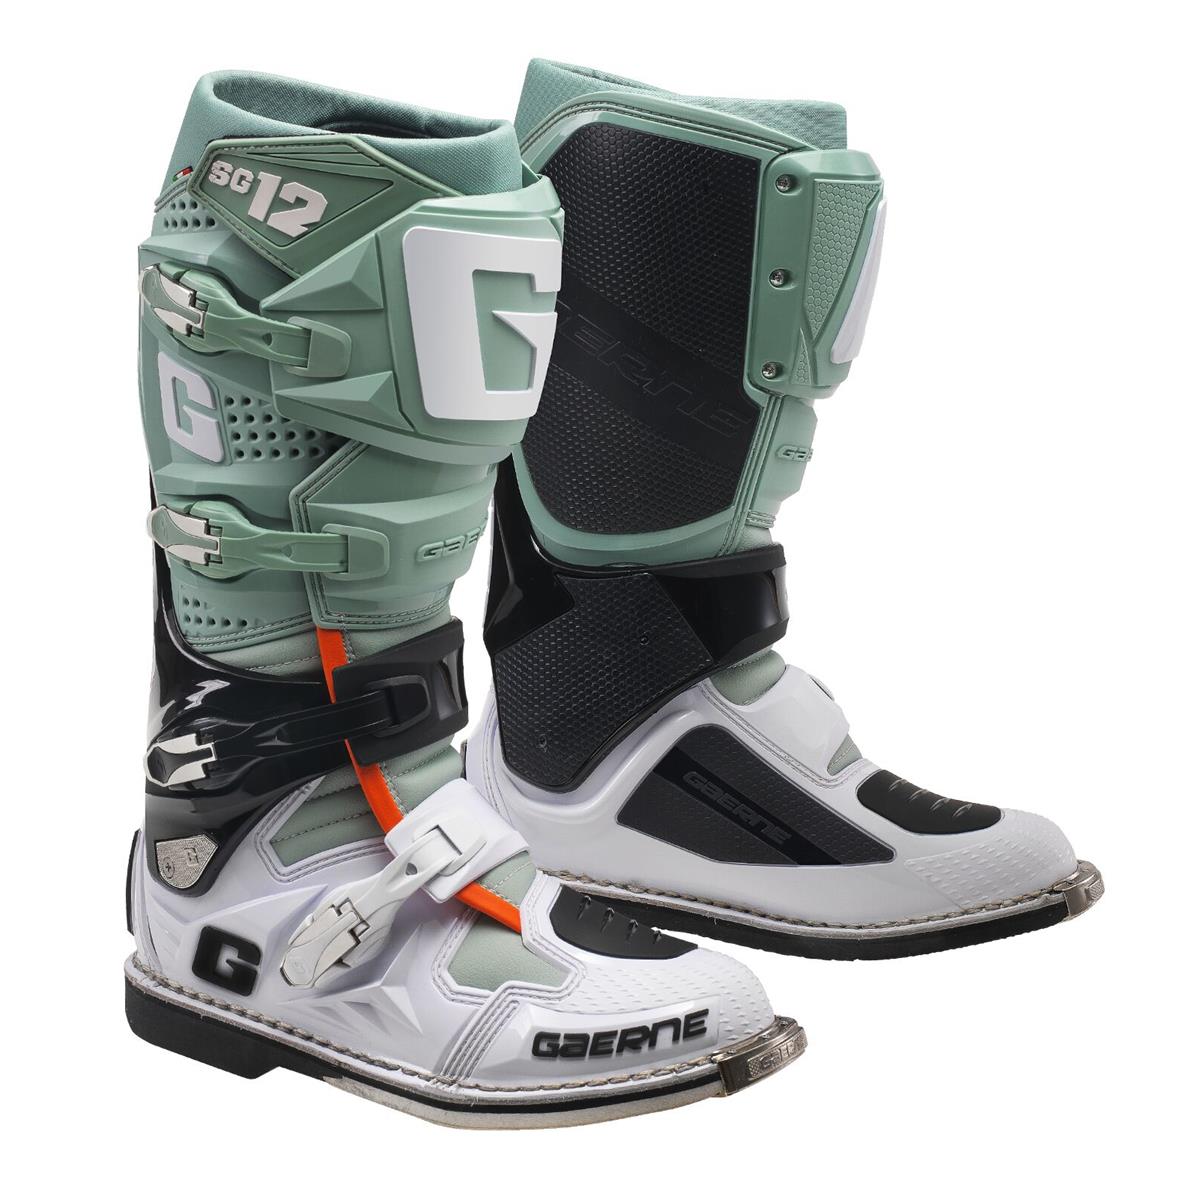 Gaerne Motocross-Stiefel SG 12 Paste - Special Edition